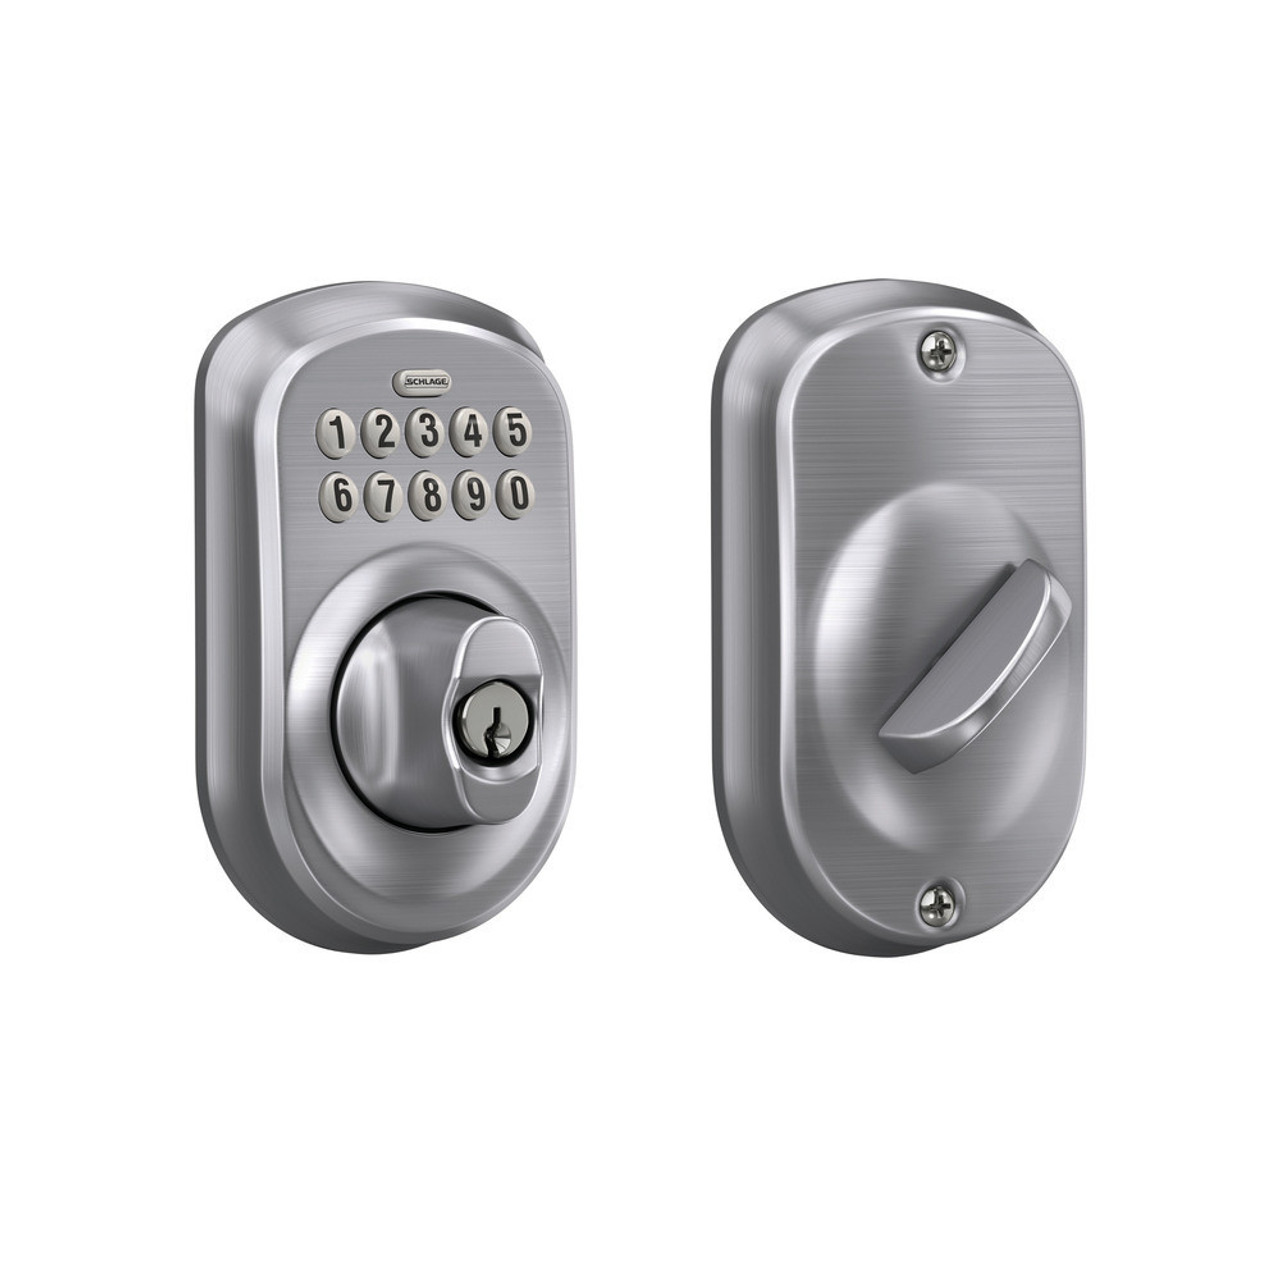 SCHLAGE BE365F SCHLAGE Electronic Keypad Deadbolt 3 Hour Fire Rated UL